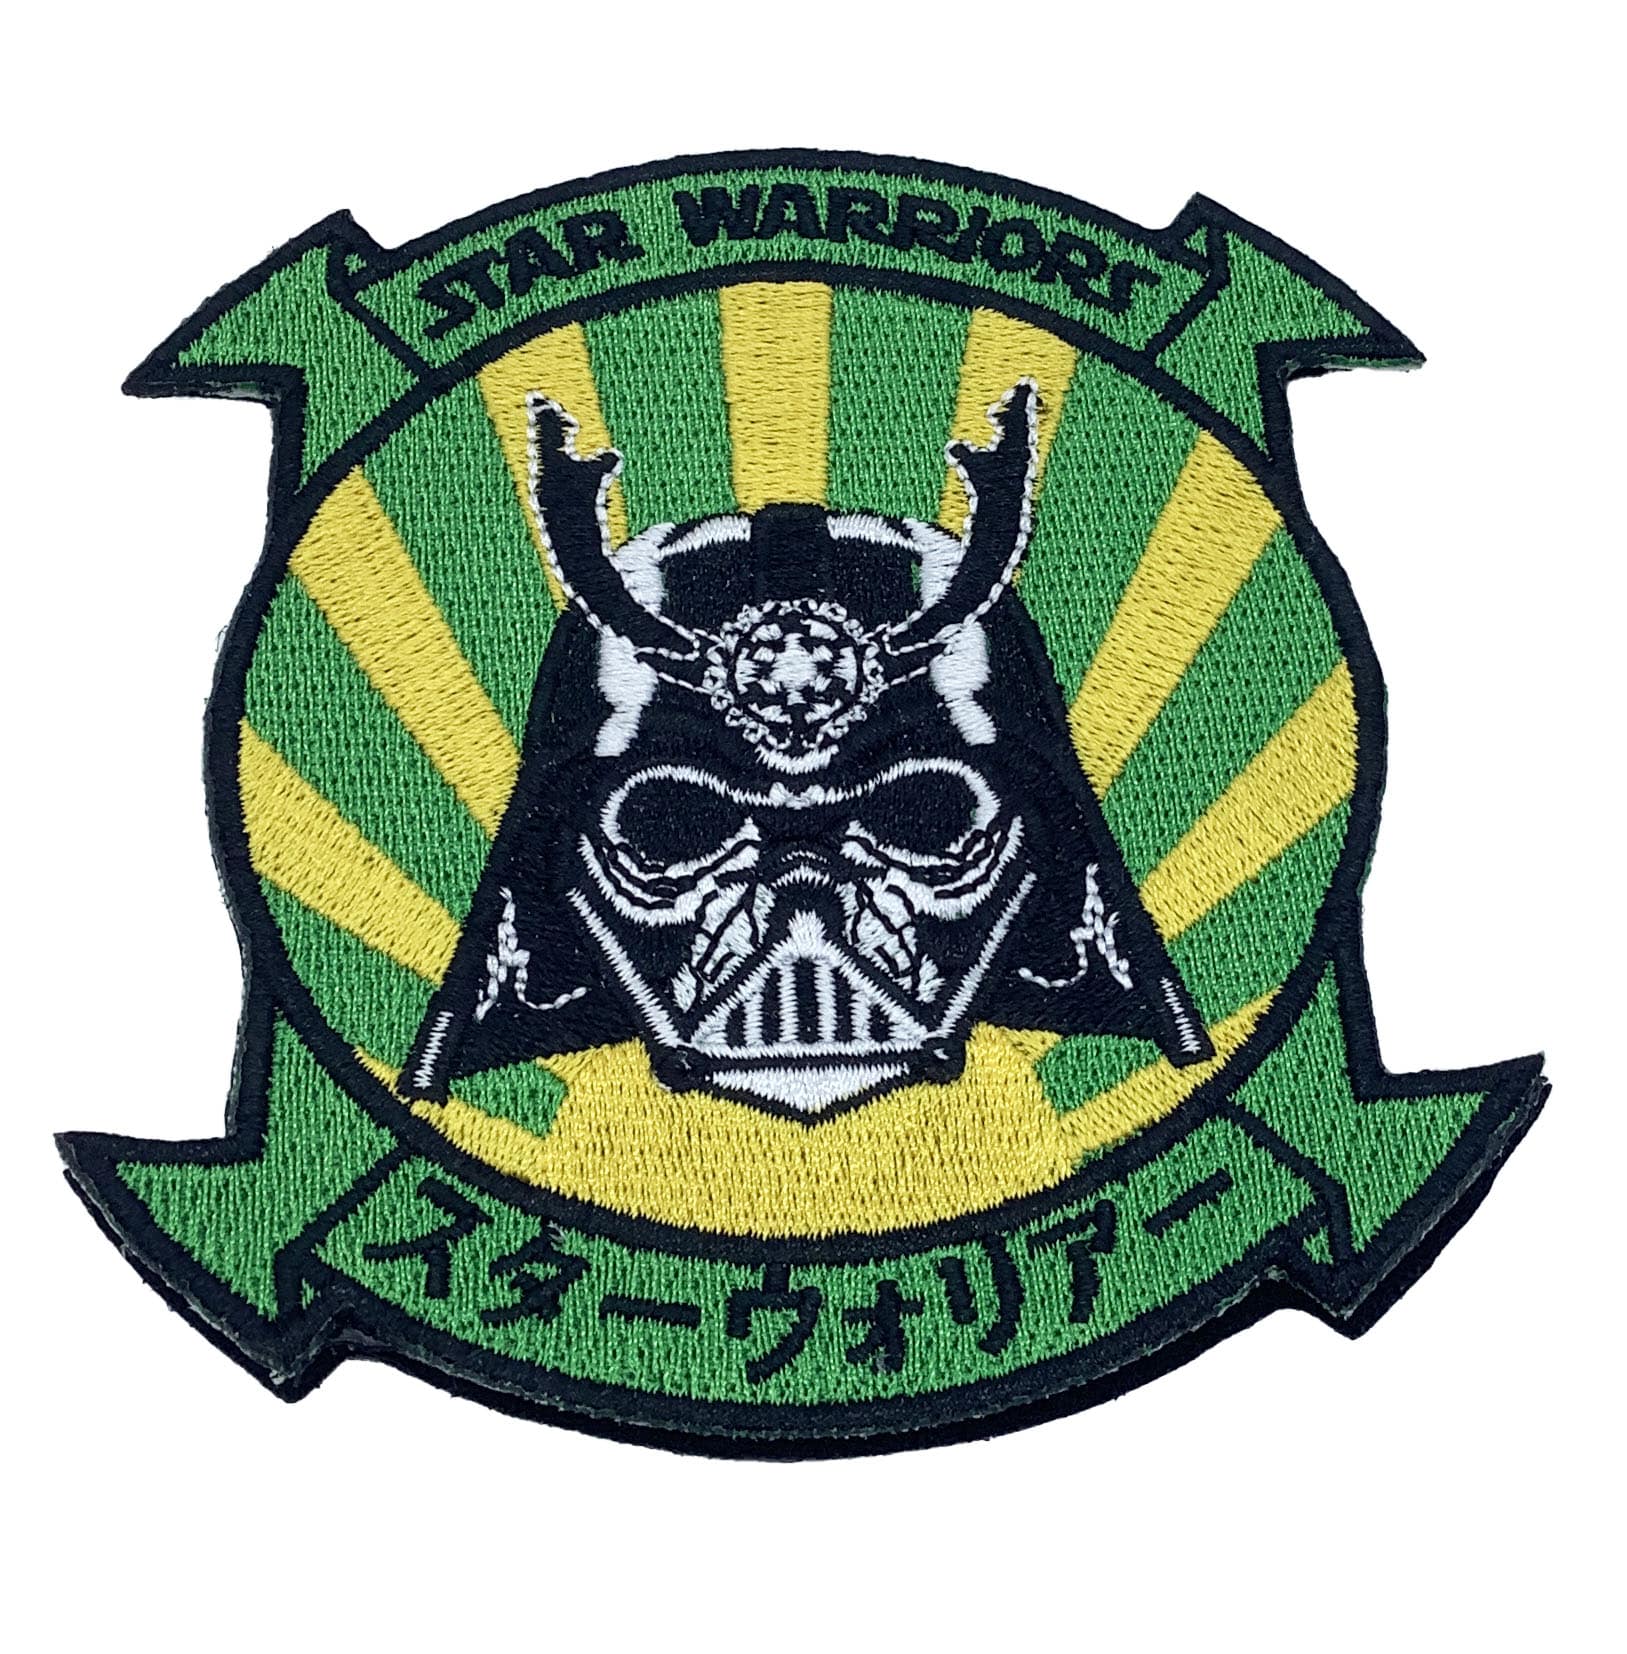 VAQ-209 Star Warriors Japan DET Patch – With Hook and Loop